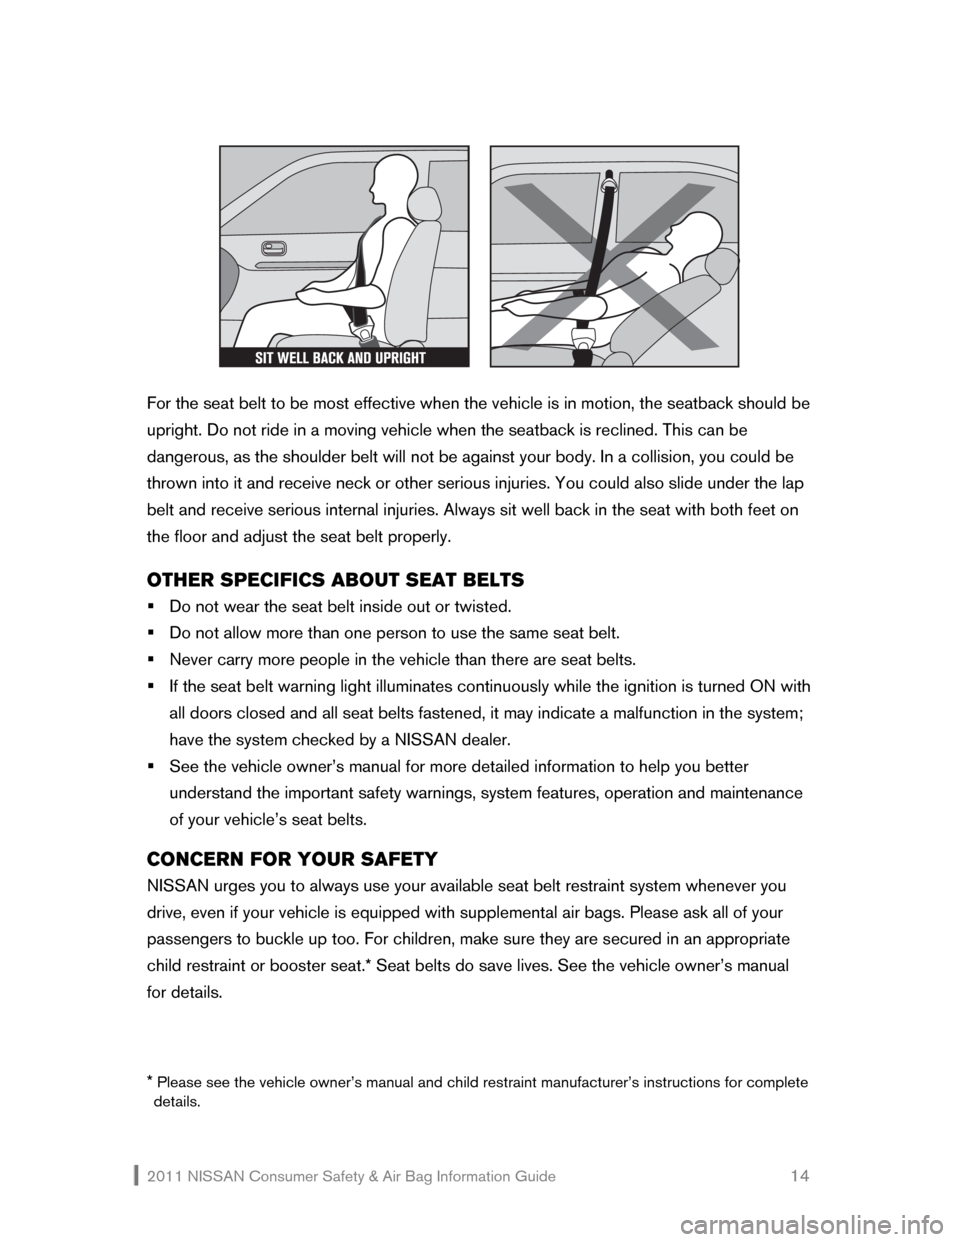 NISSAN ROGUE 2011 1.G Consumer Safety Air Bag Information Guide 2011 NISSAN Consumer Safety & Air Bag Information Guide                                                       14 
 
 
 
For the seat belt to be most effective when the vehicle is in motion, the seatba